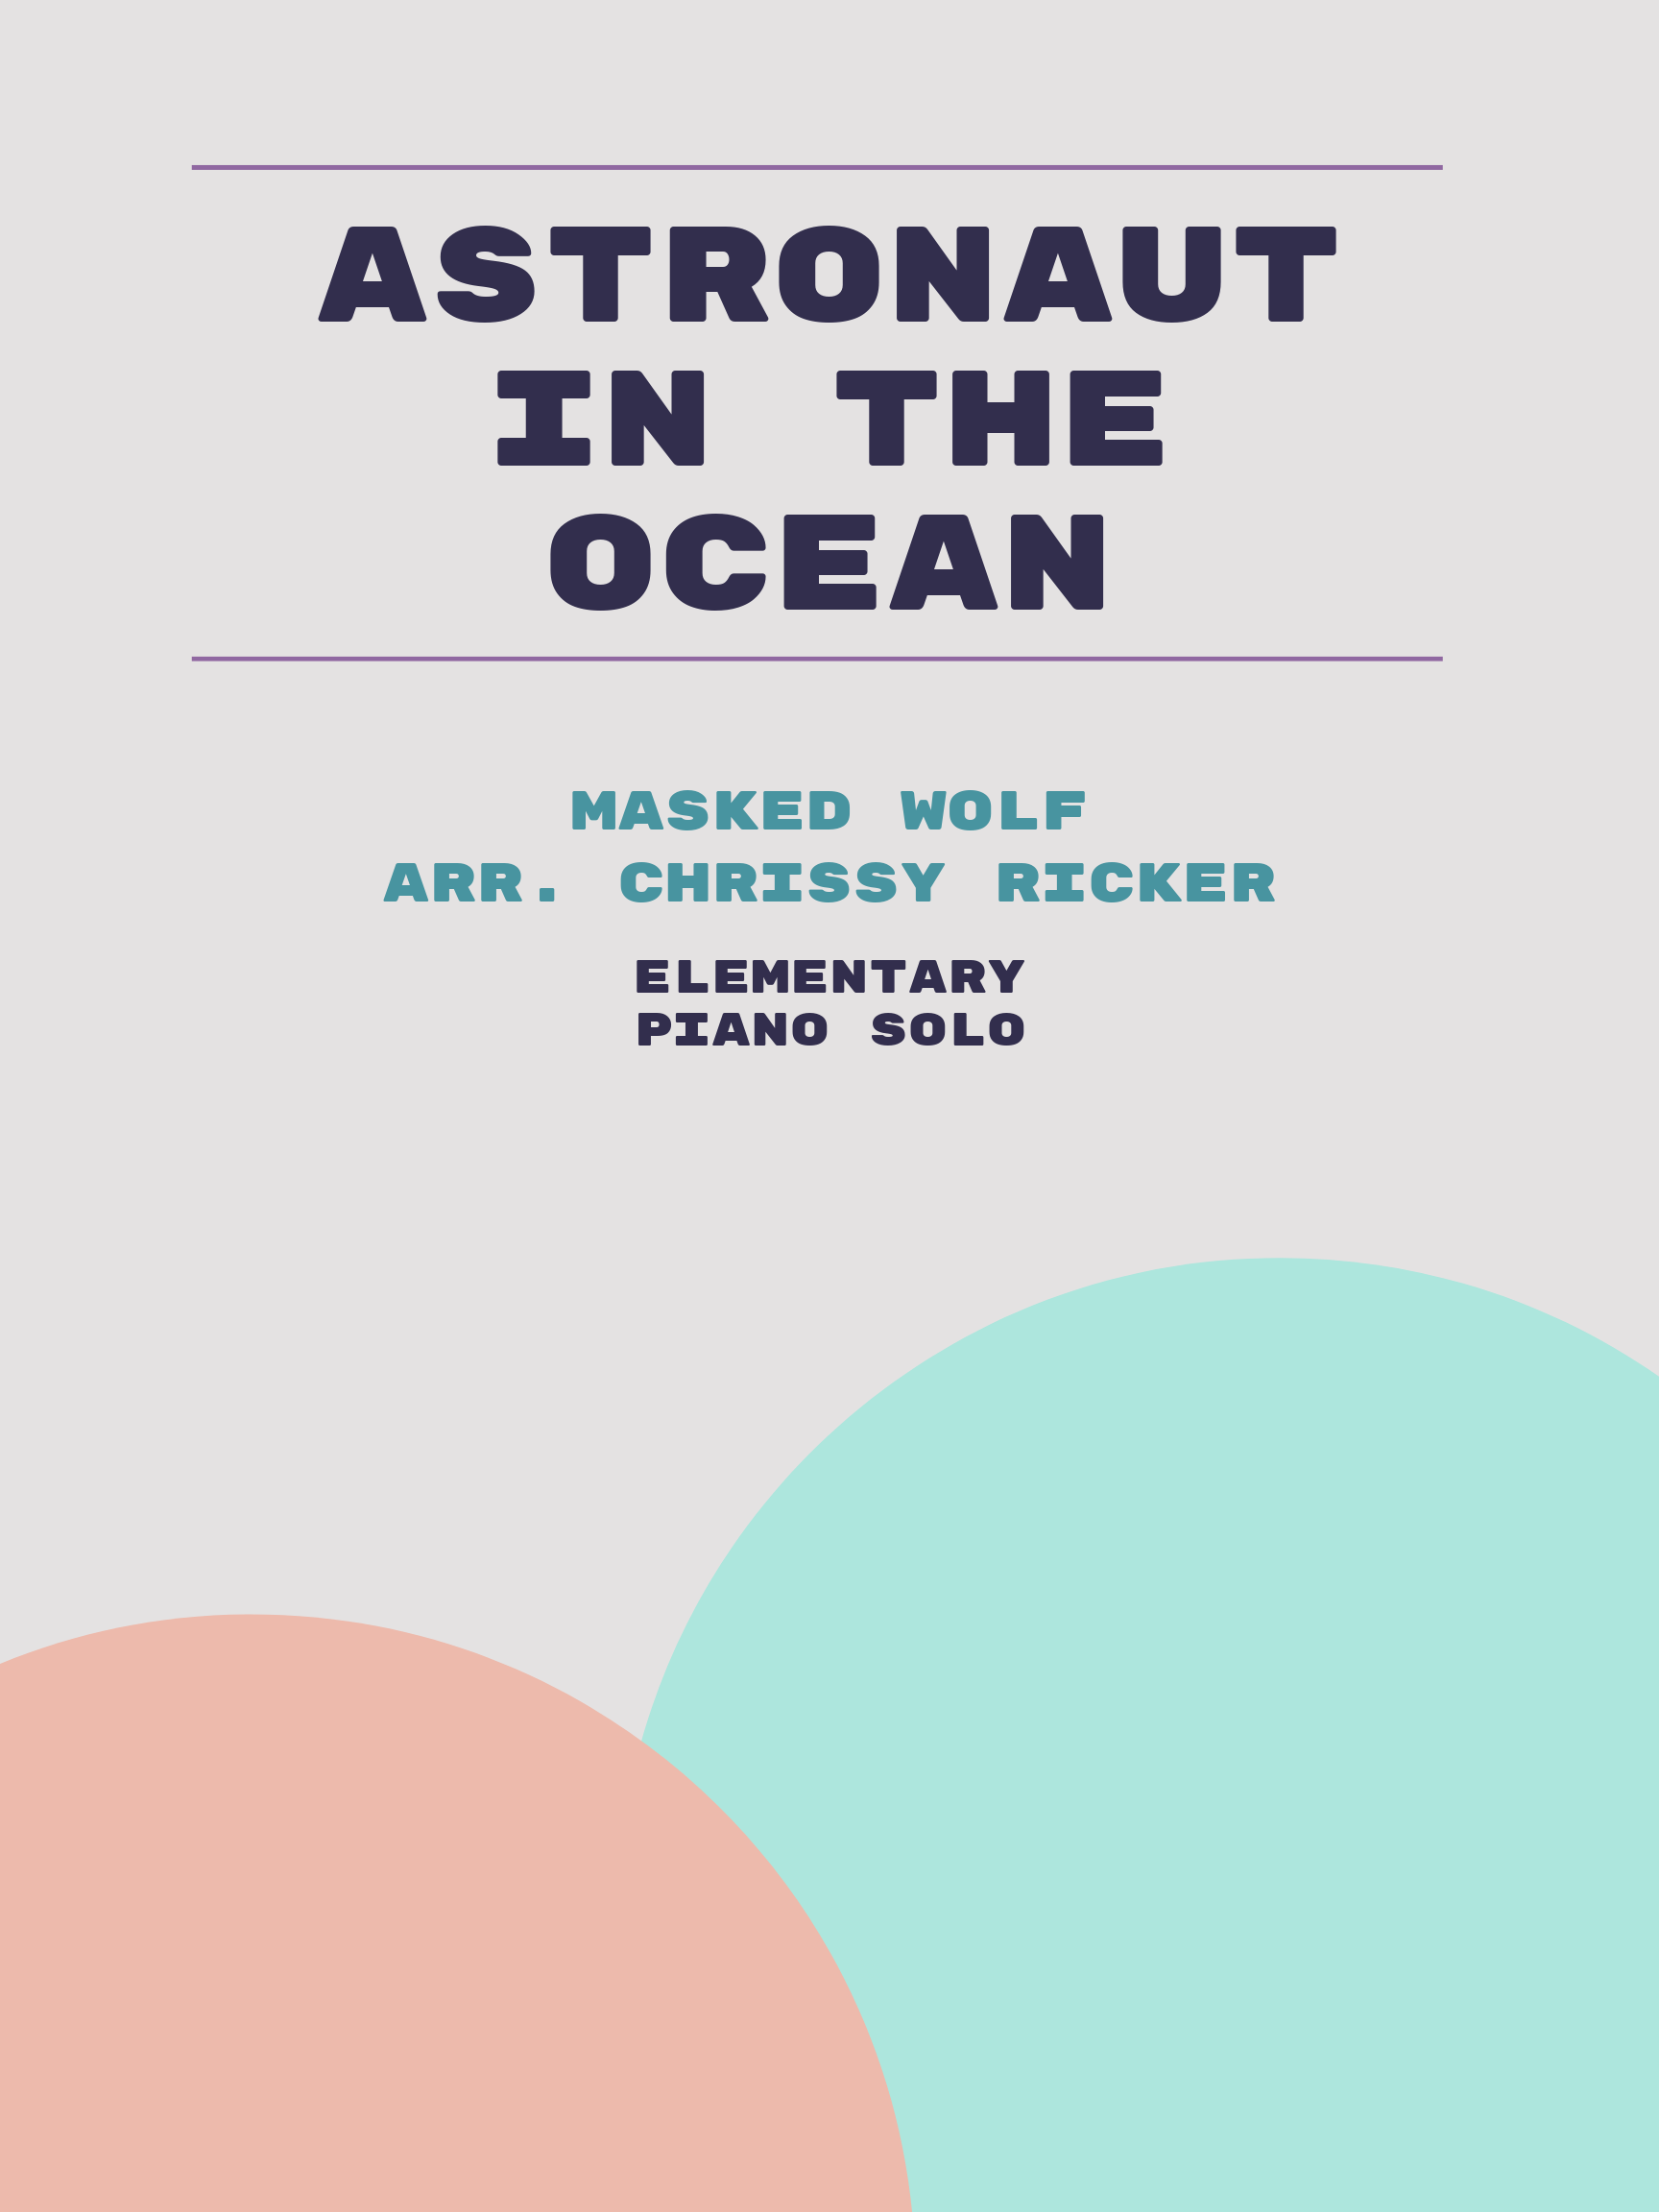 Astronaut in the Ocean by Masked Wolf